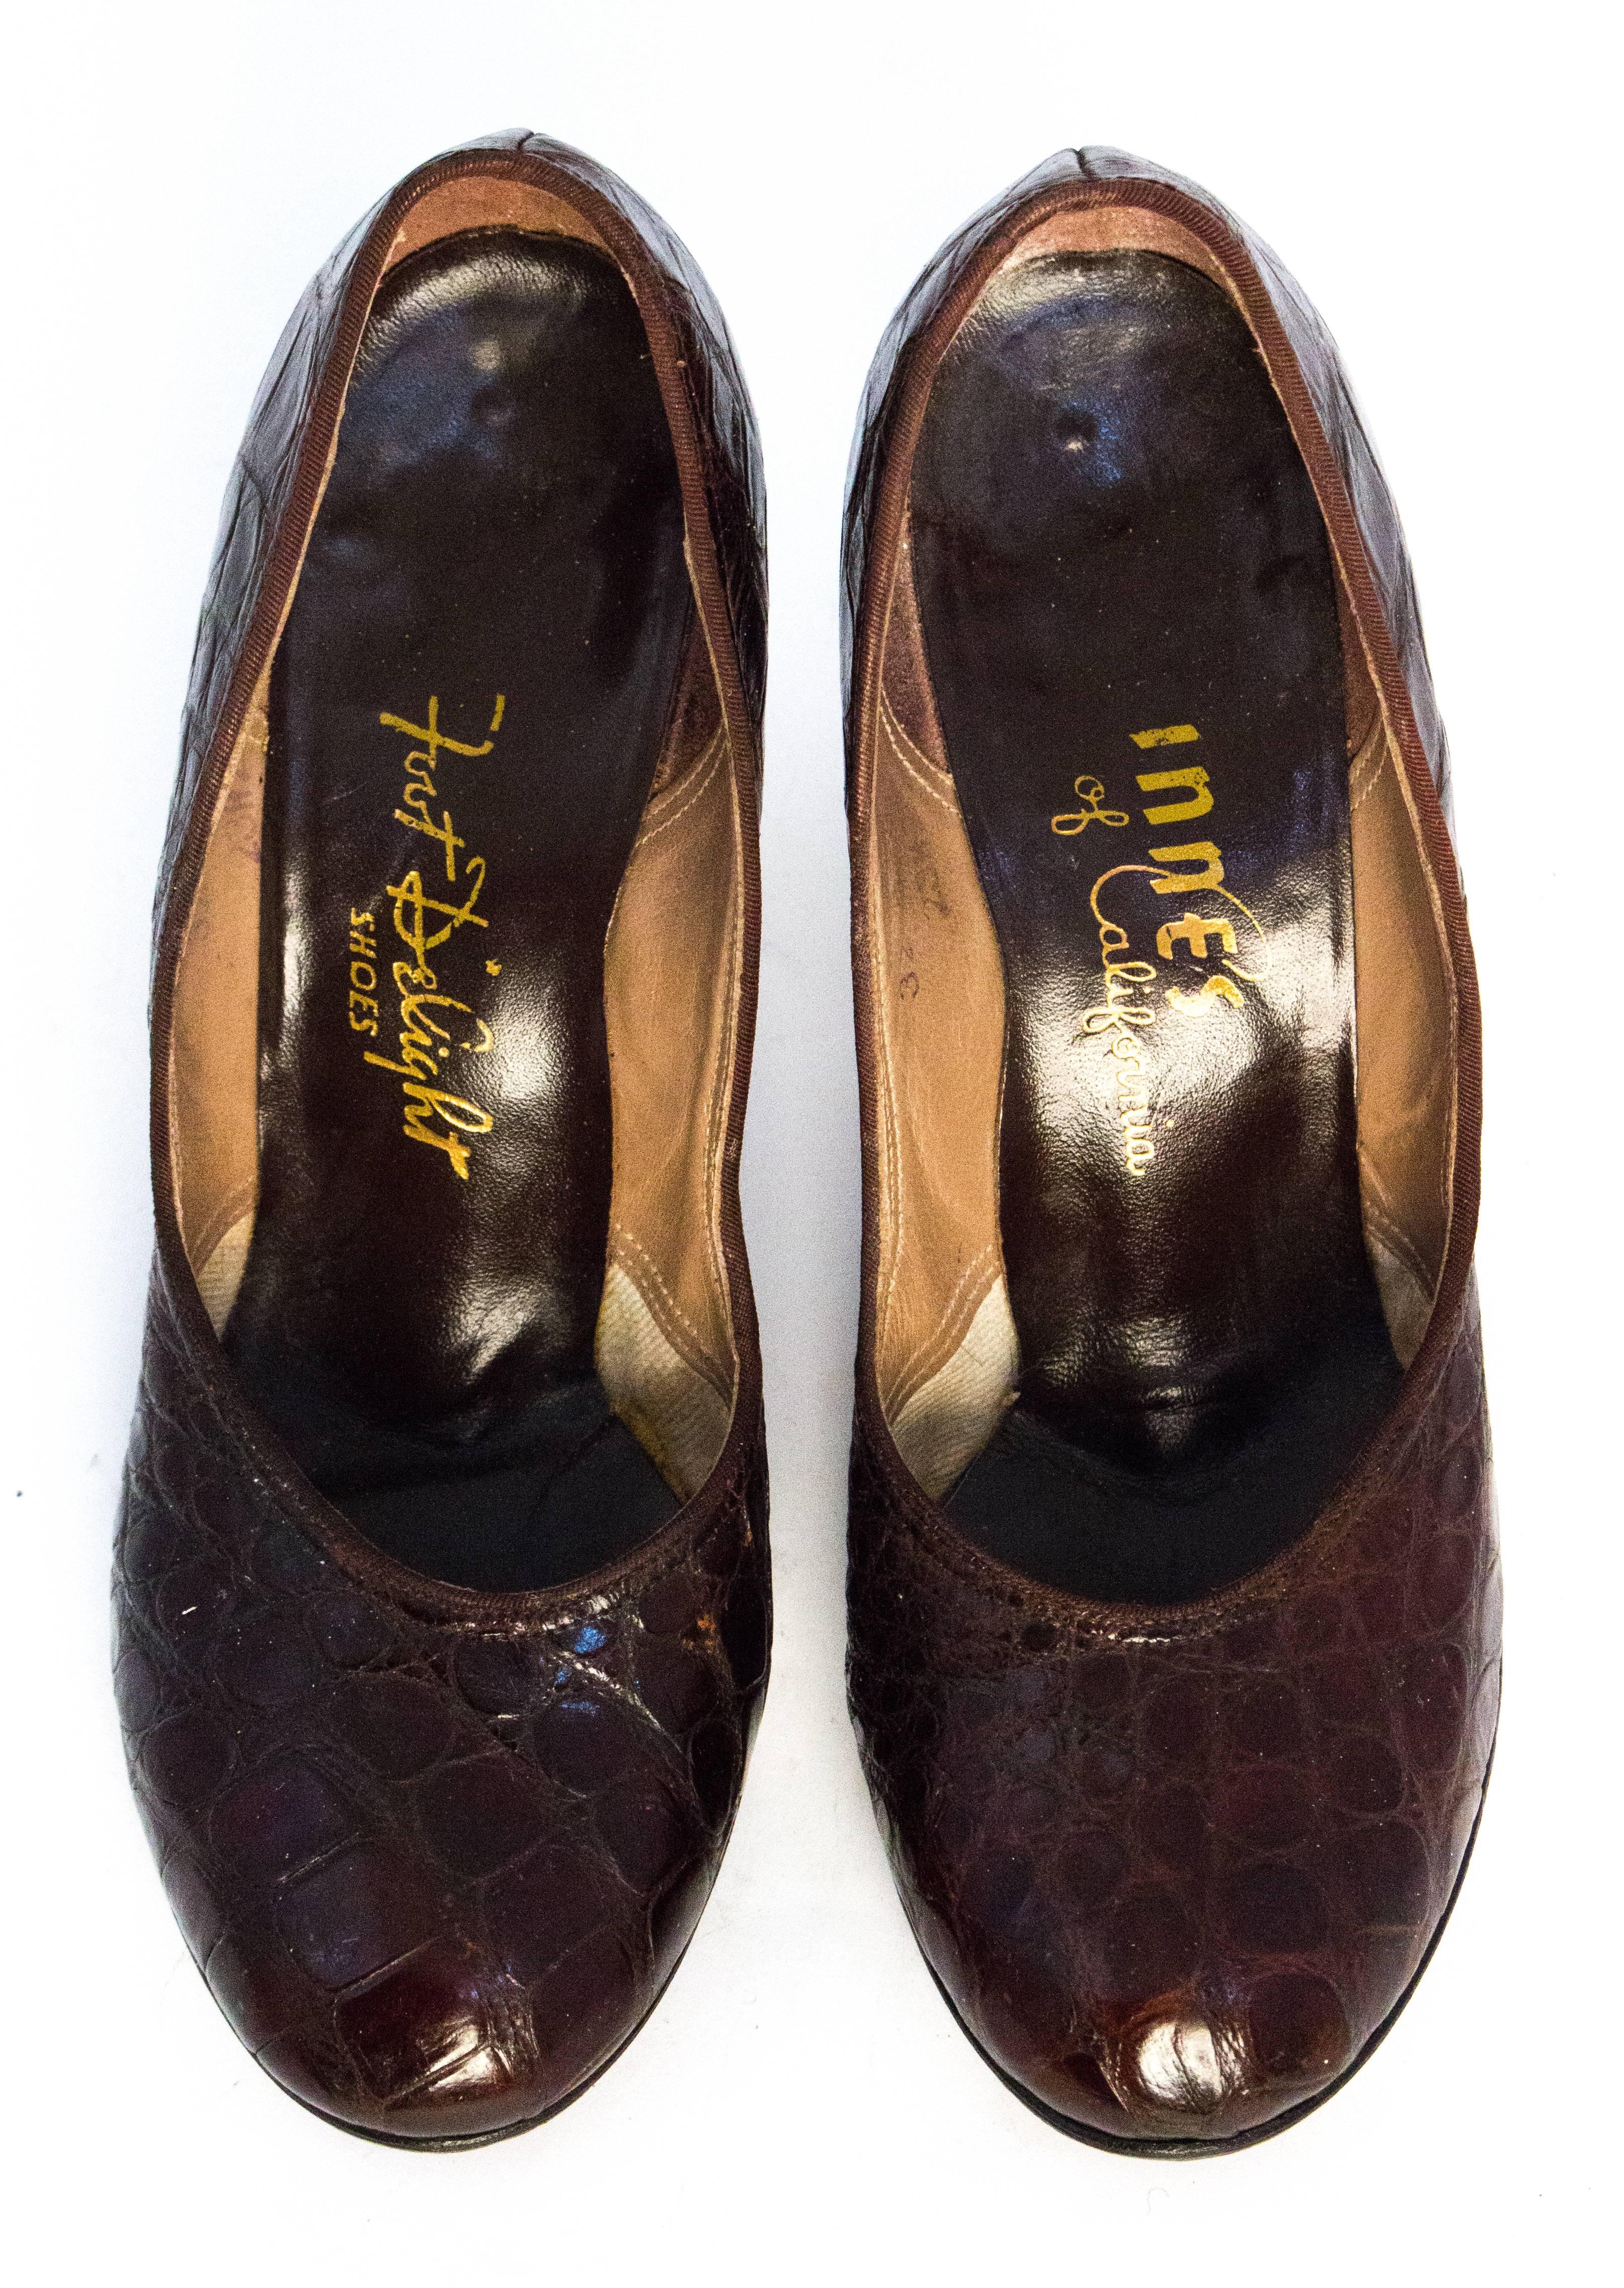 40s round toe chocolate brown alligator pumps. 

Measurements:
Insole: 9 1/4 inches
Palm: 3 inches
Heel: 3 1/2 inches 
